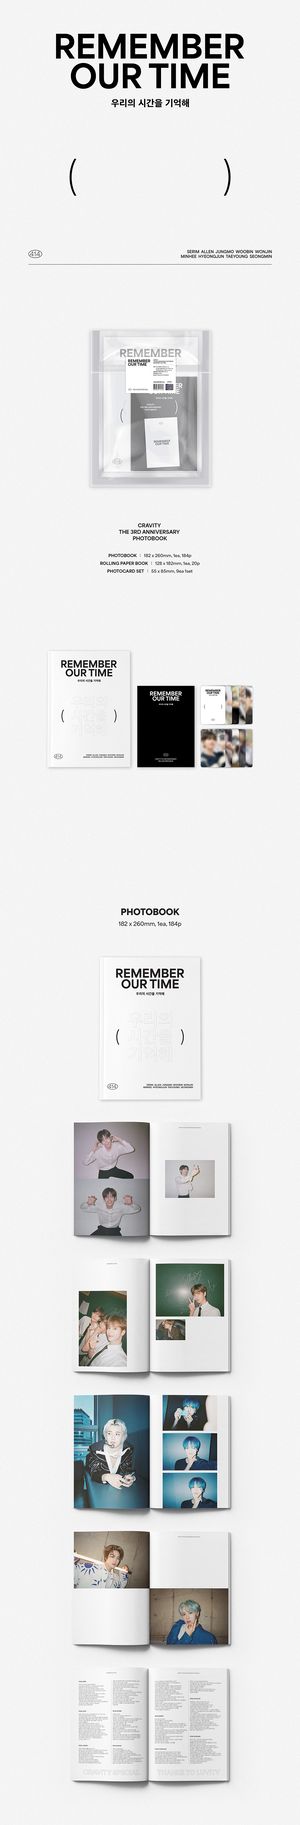 CRAVITY - REMEMBER OUR TIME THE 3RD ANNIVERSARY PHOTOBOOK SOUNDWAVE GIFT VER. - COKODIVE